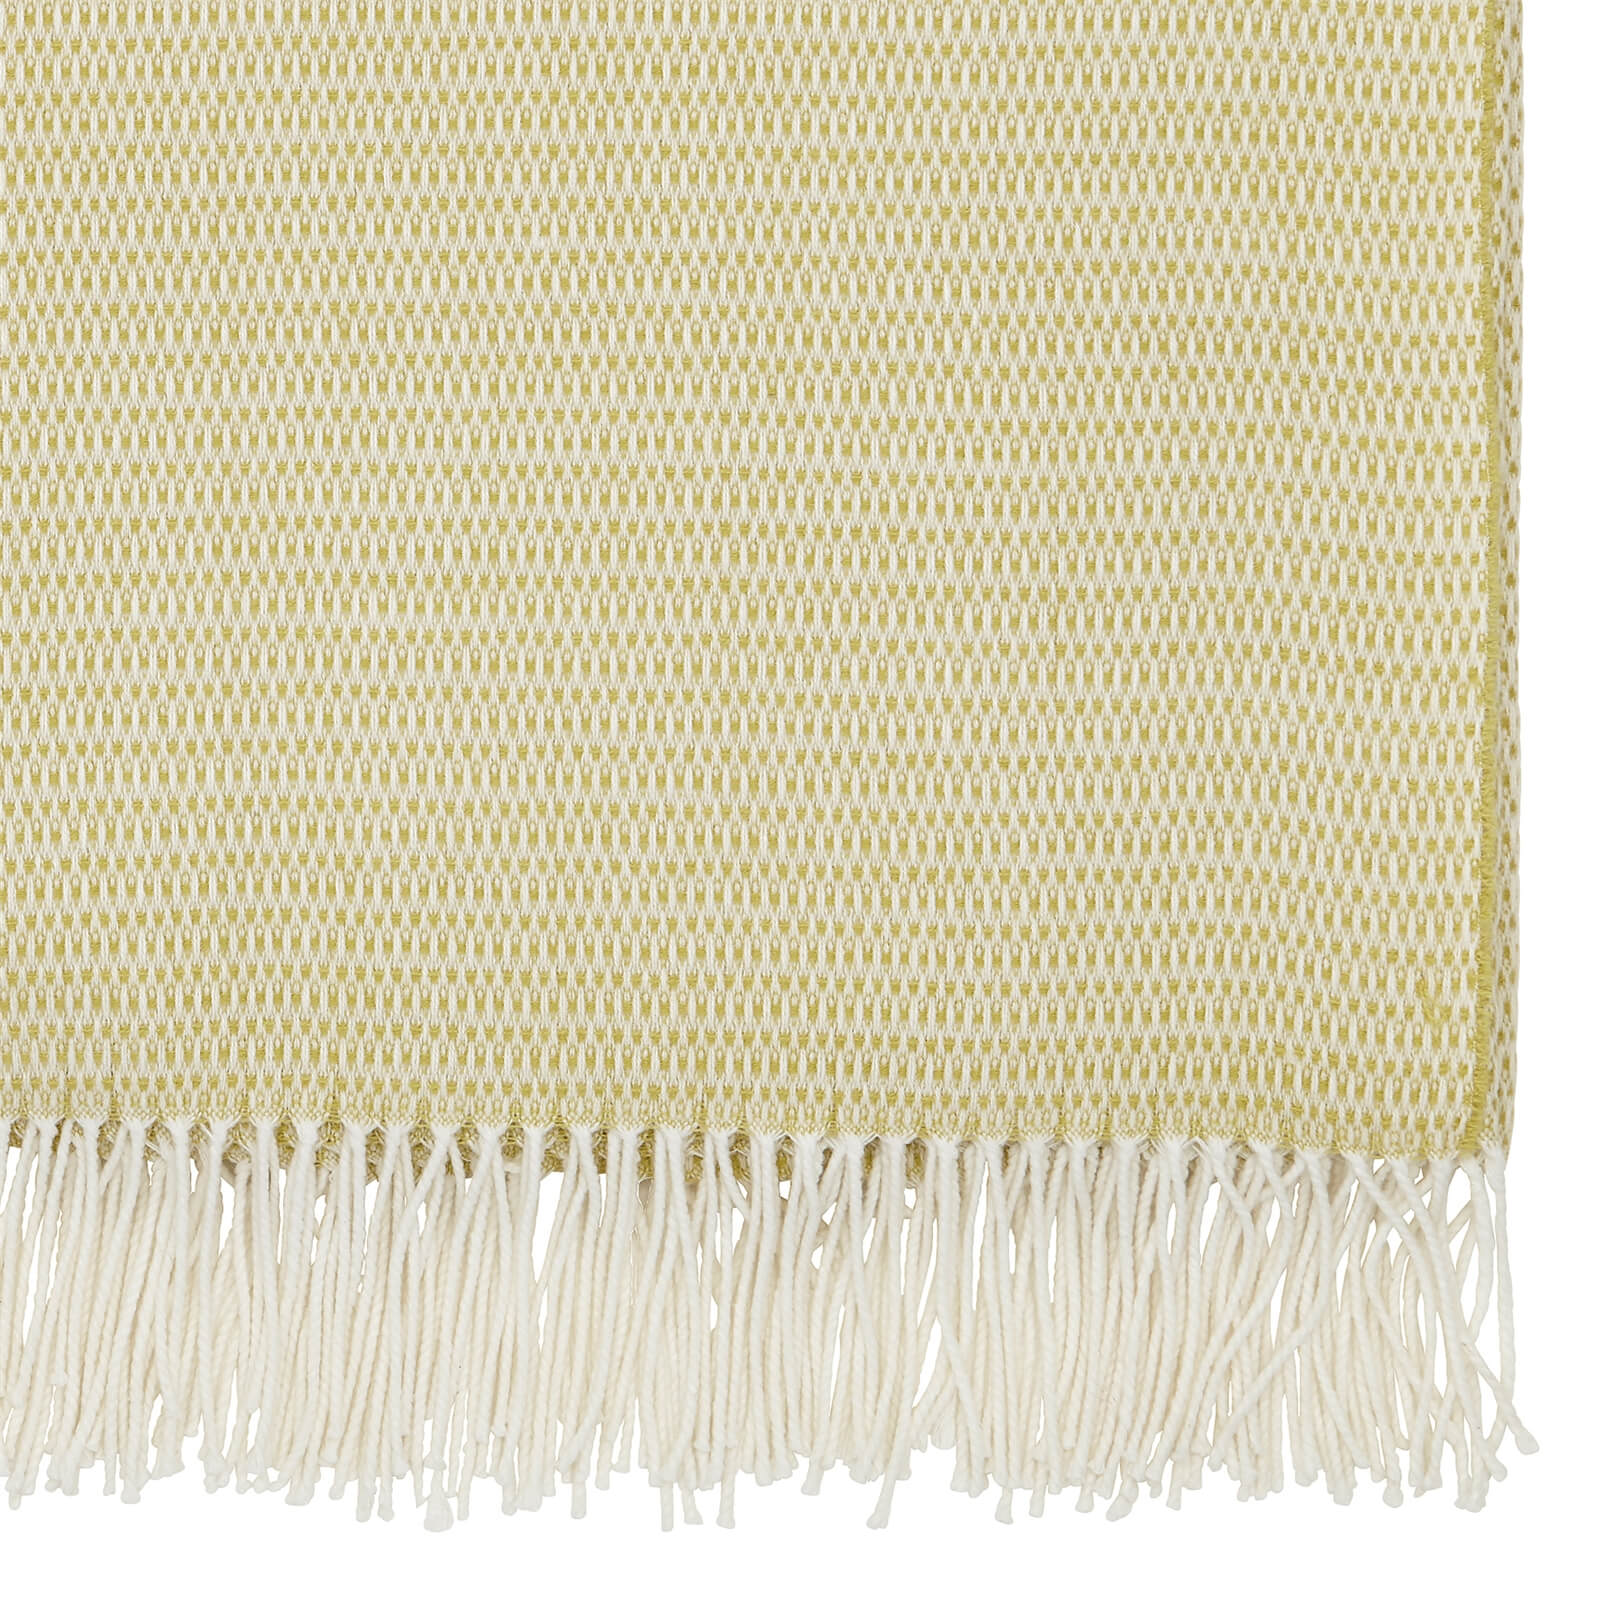 Sanderson Home Coraline Woven Throw 130x170cm - Chartreuse